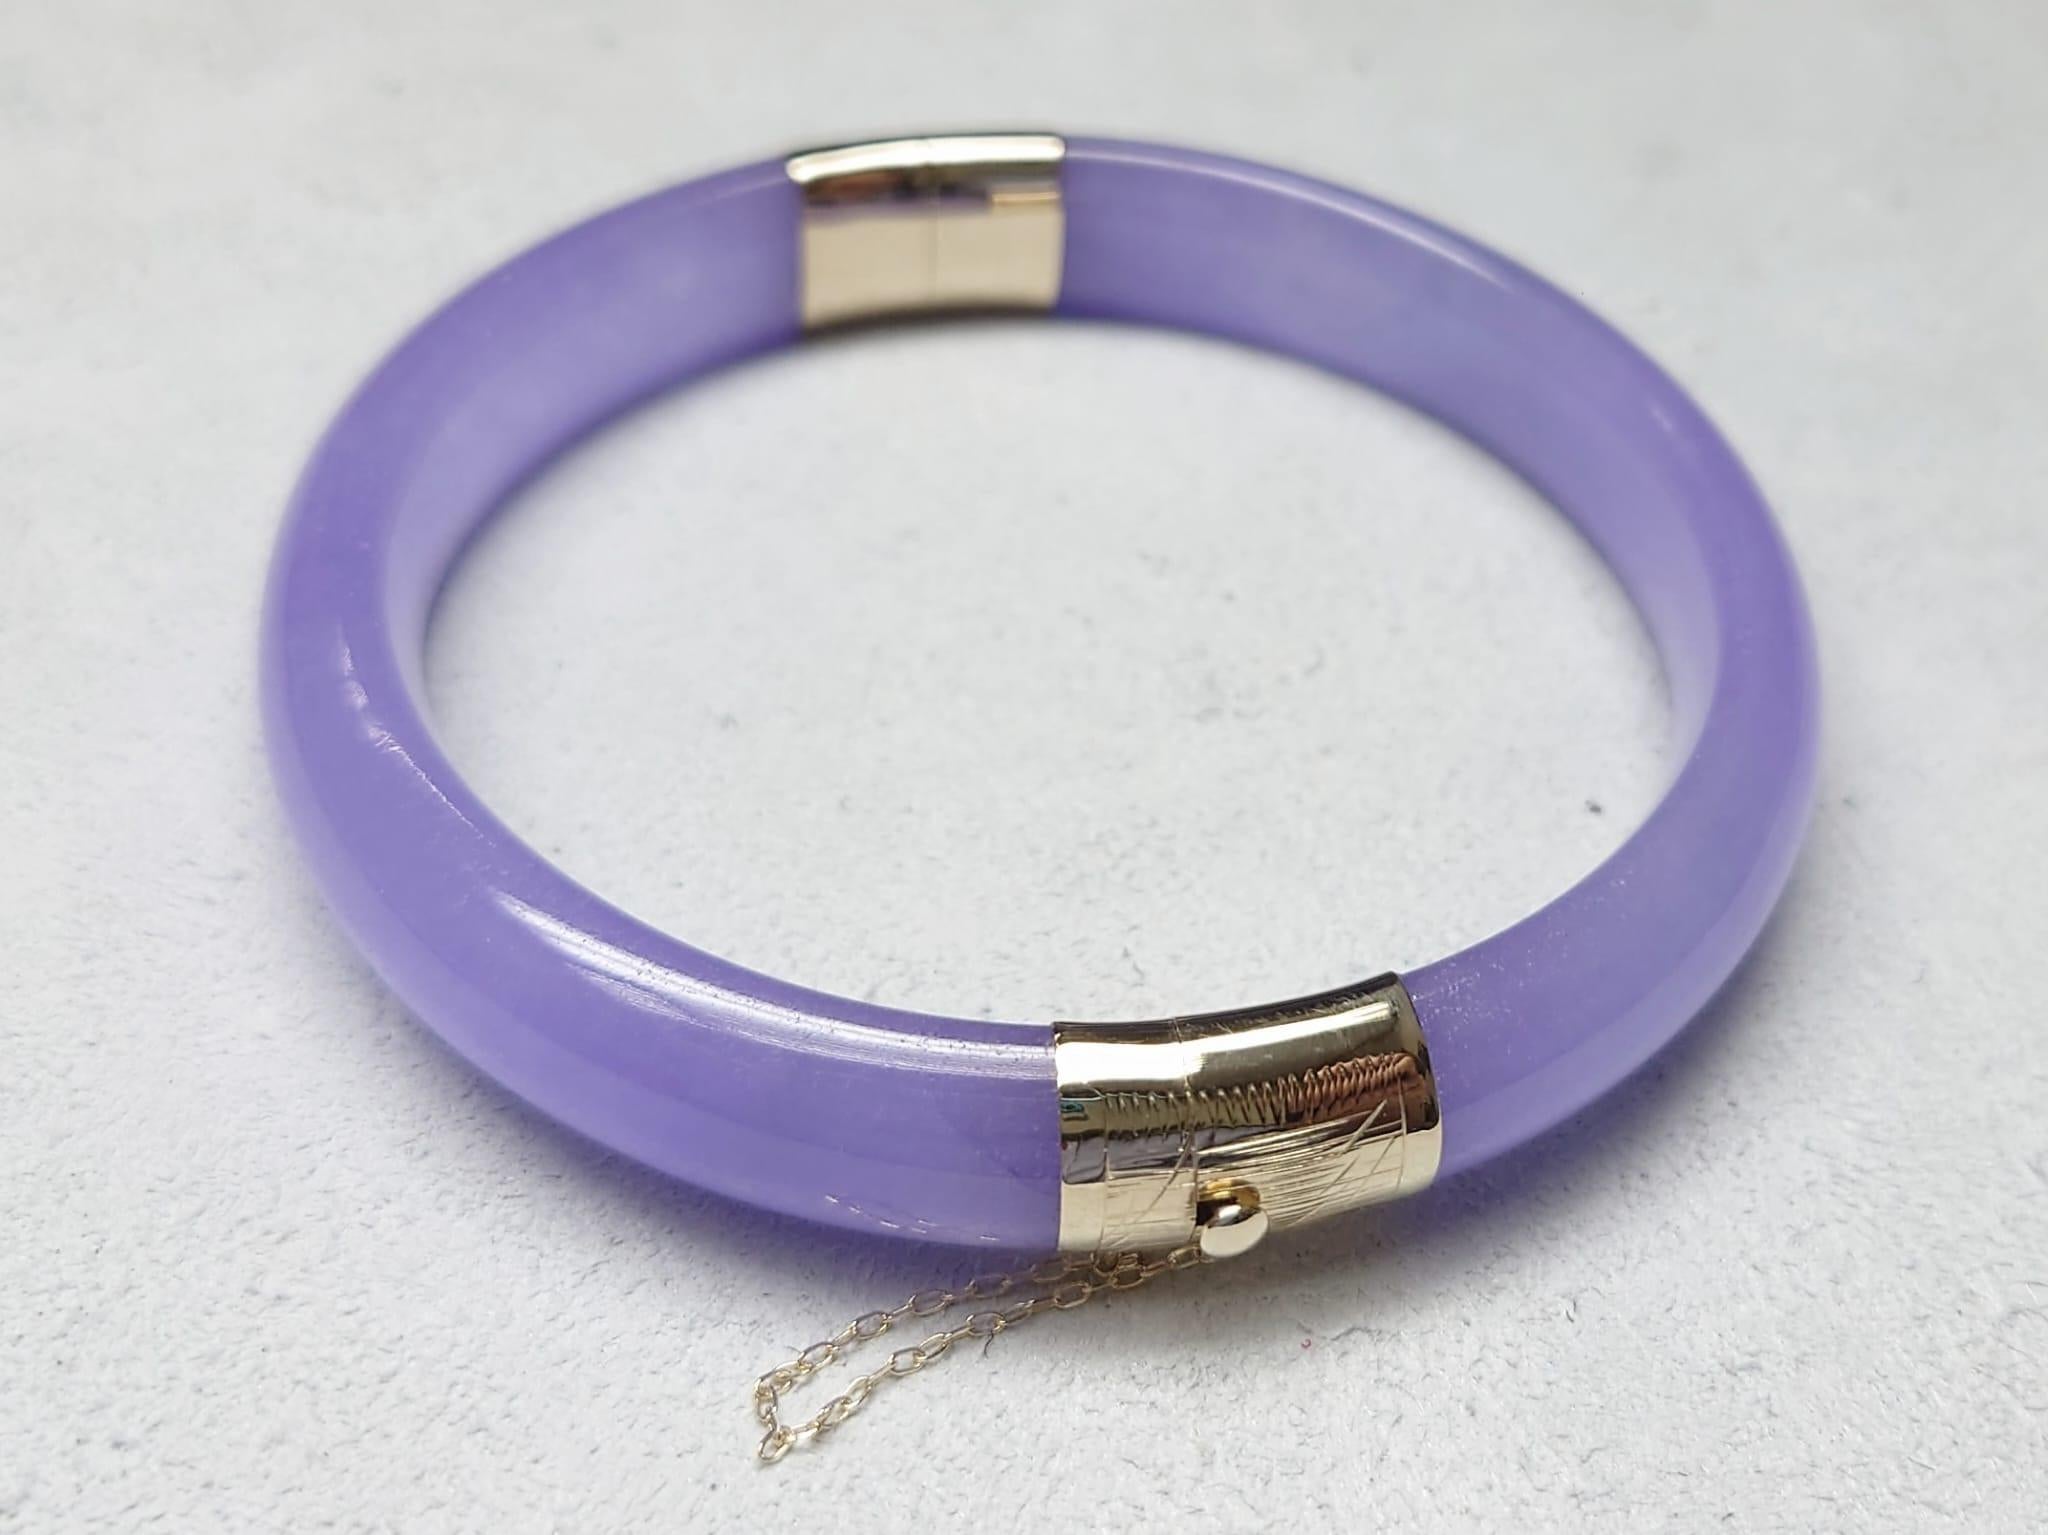 Viceroy's Circular Lavender Jade Bangle Bracelet (with 14K Yellow Gold) For Sale 9